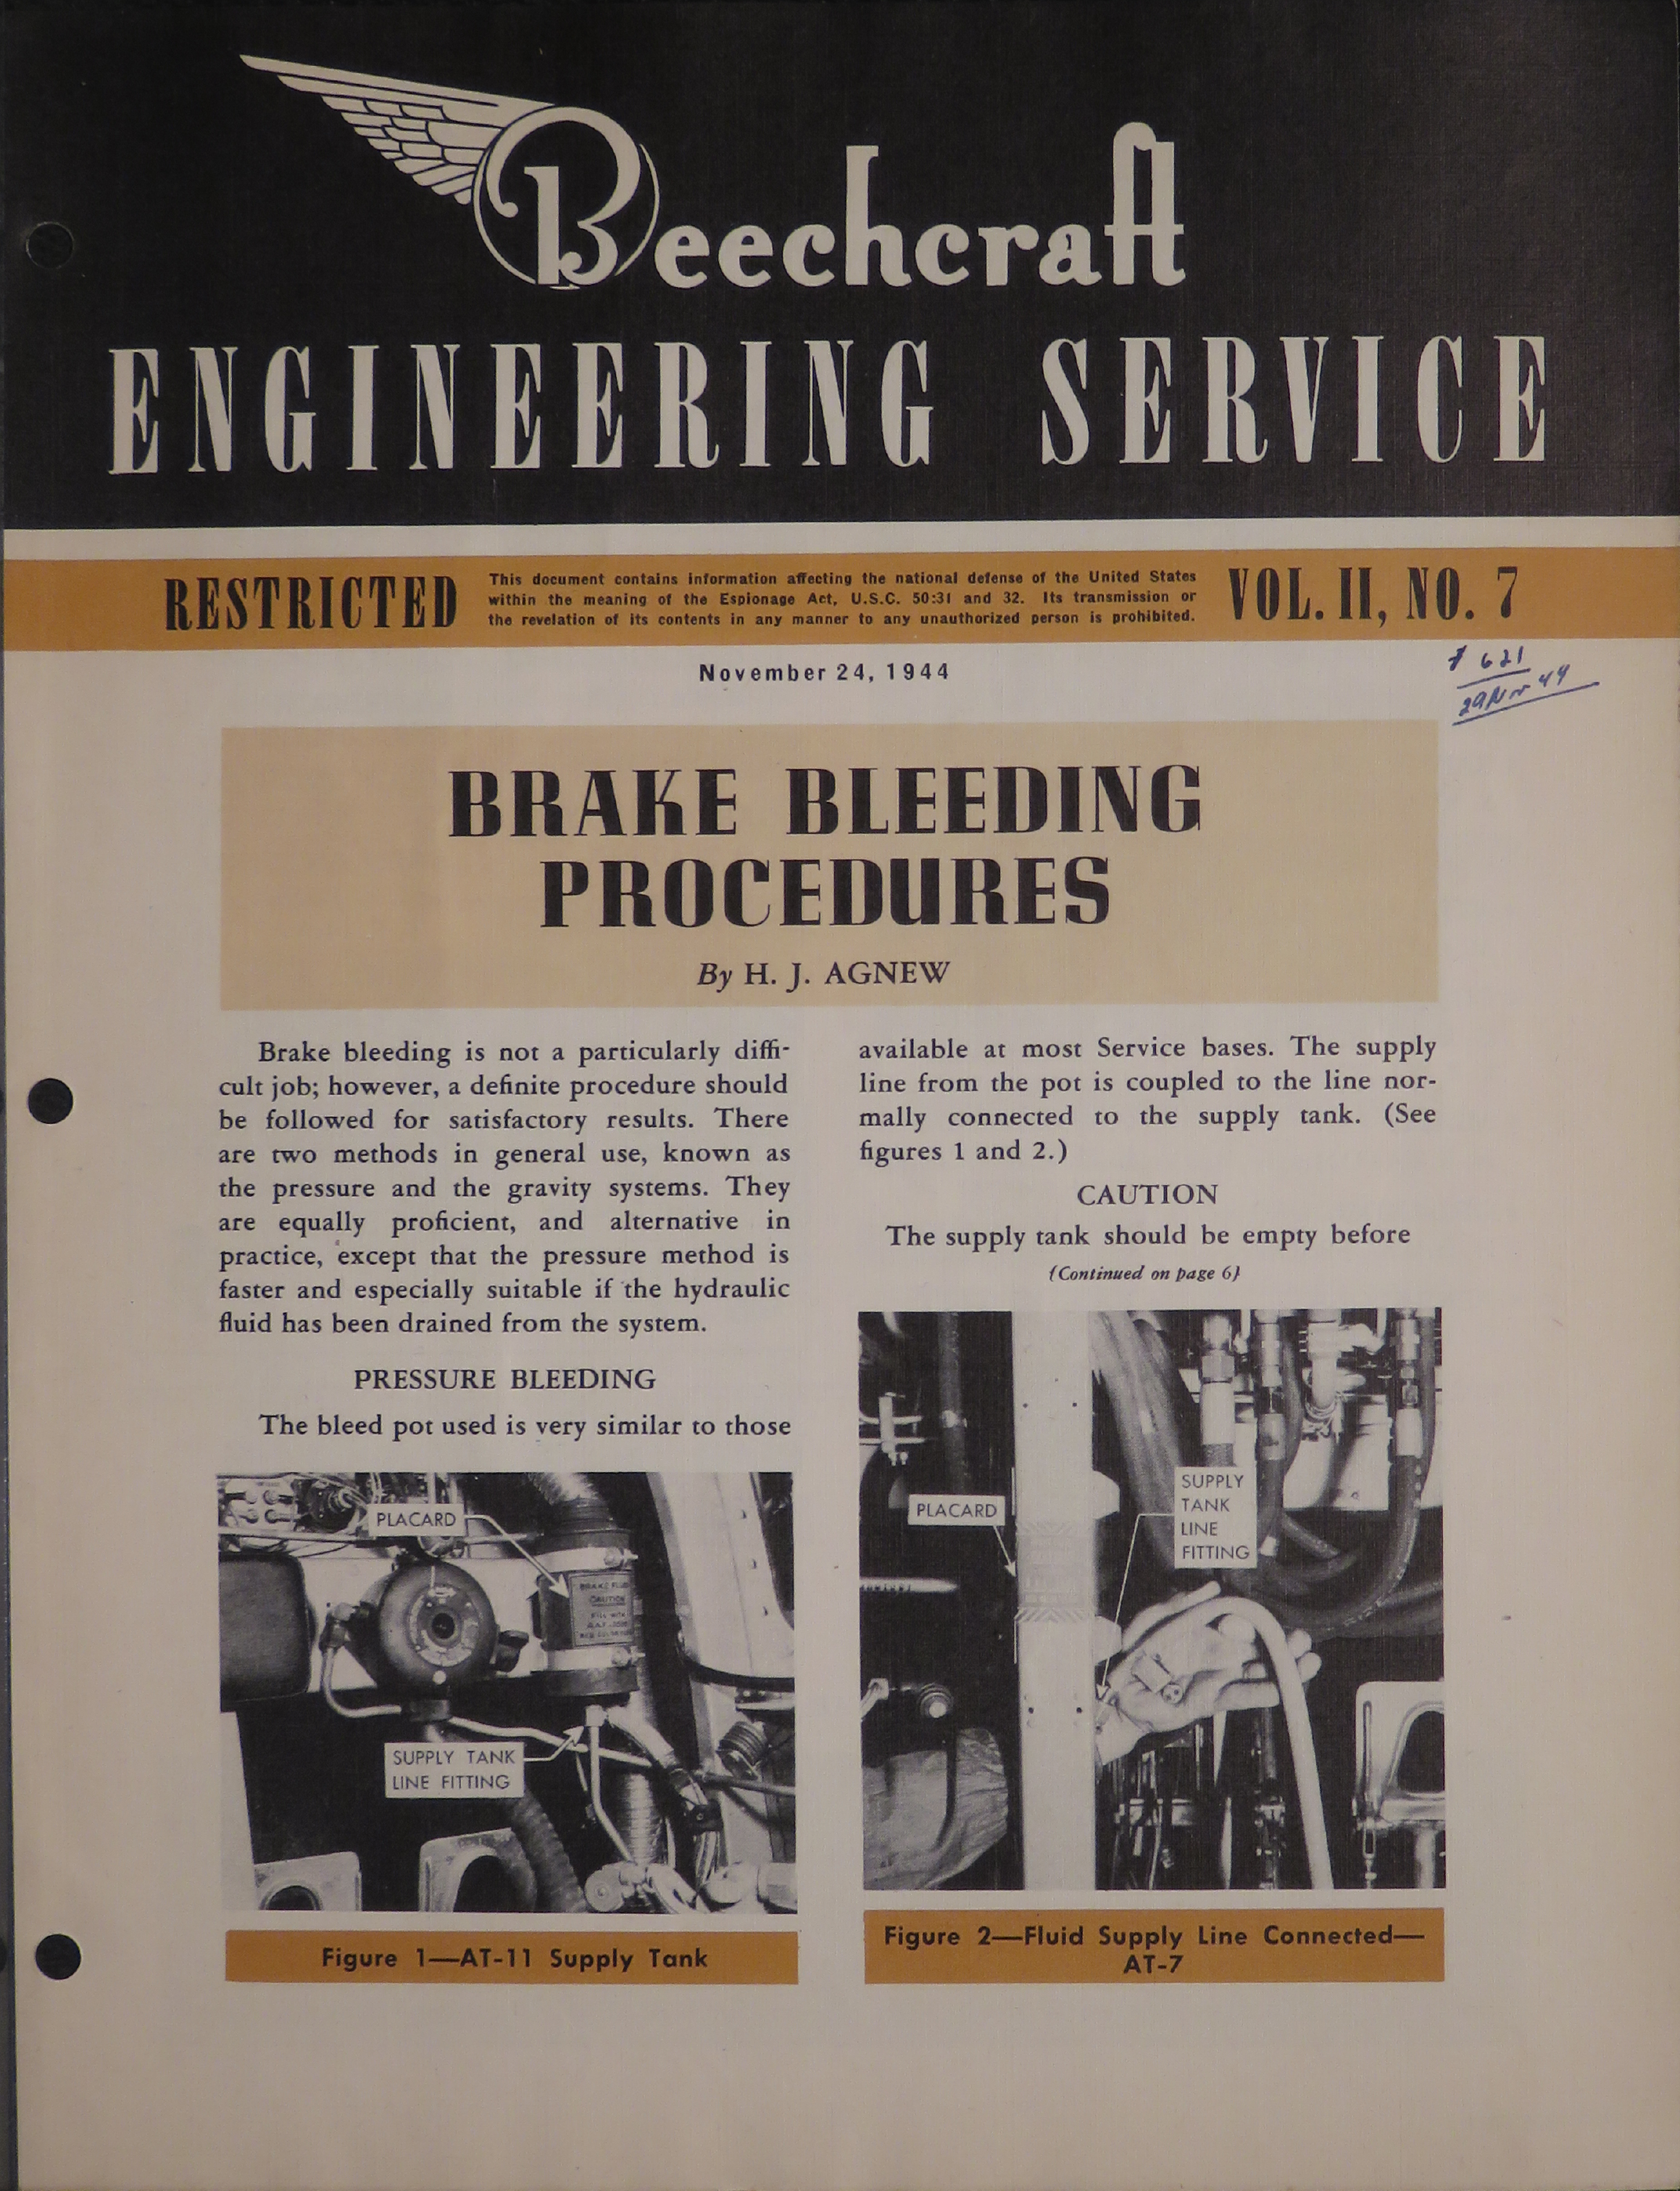 Sample page 1 from AirCorps Library document: Vol. II, No. 7 - Beechcraft Engineering Service